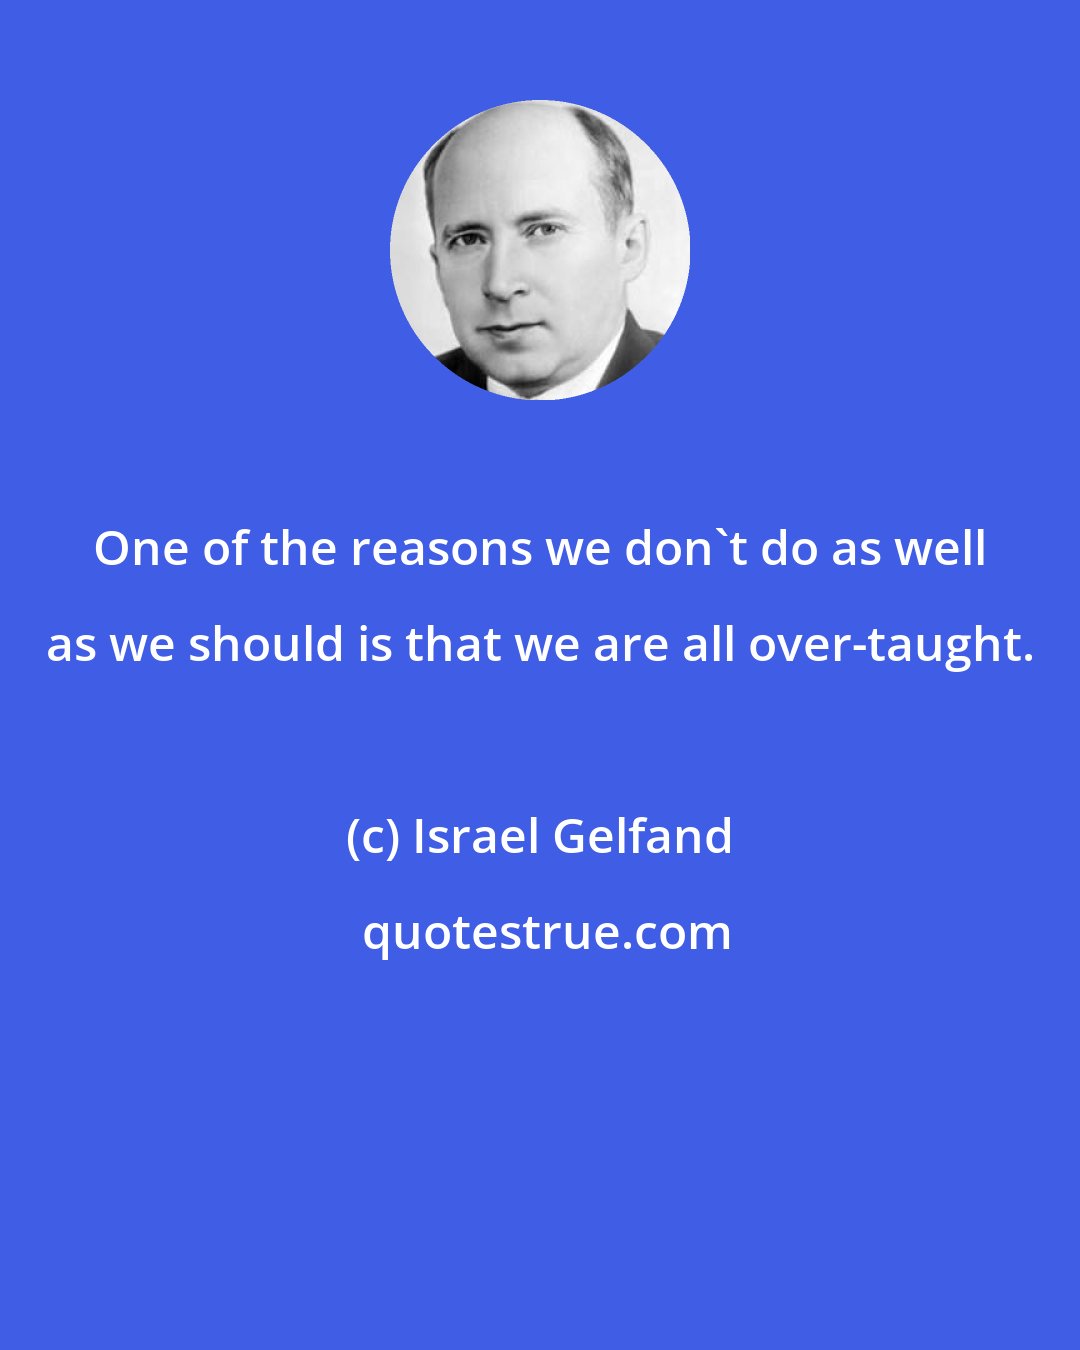 Israel Gelfand: One of the reasons we don't do as well as we should is that we are all over-taught.